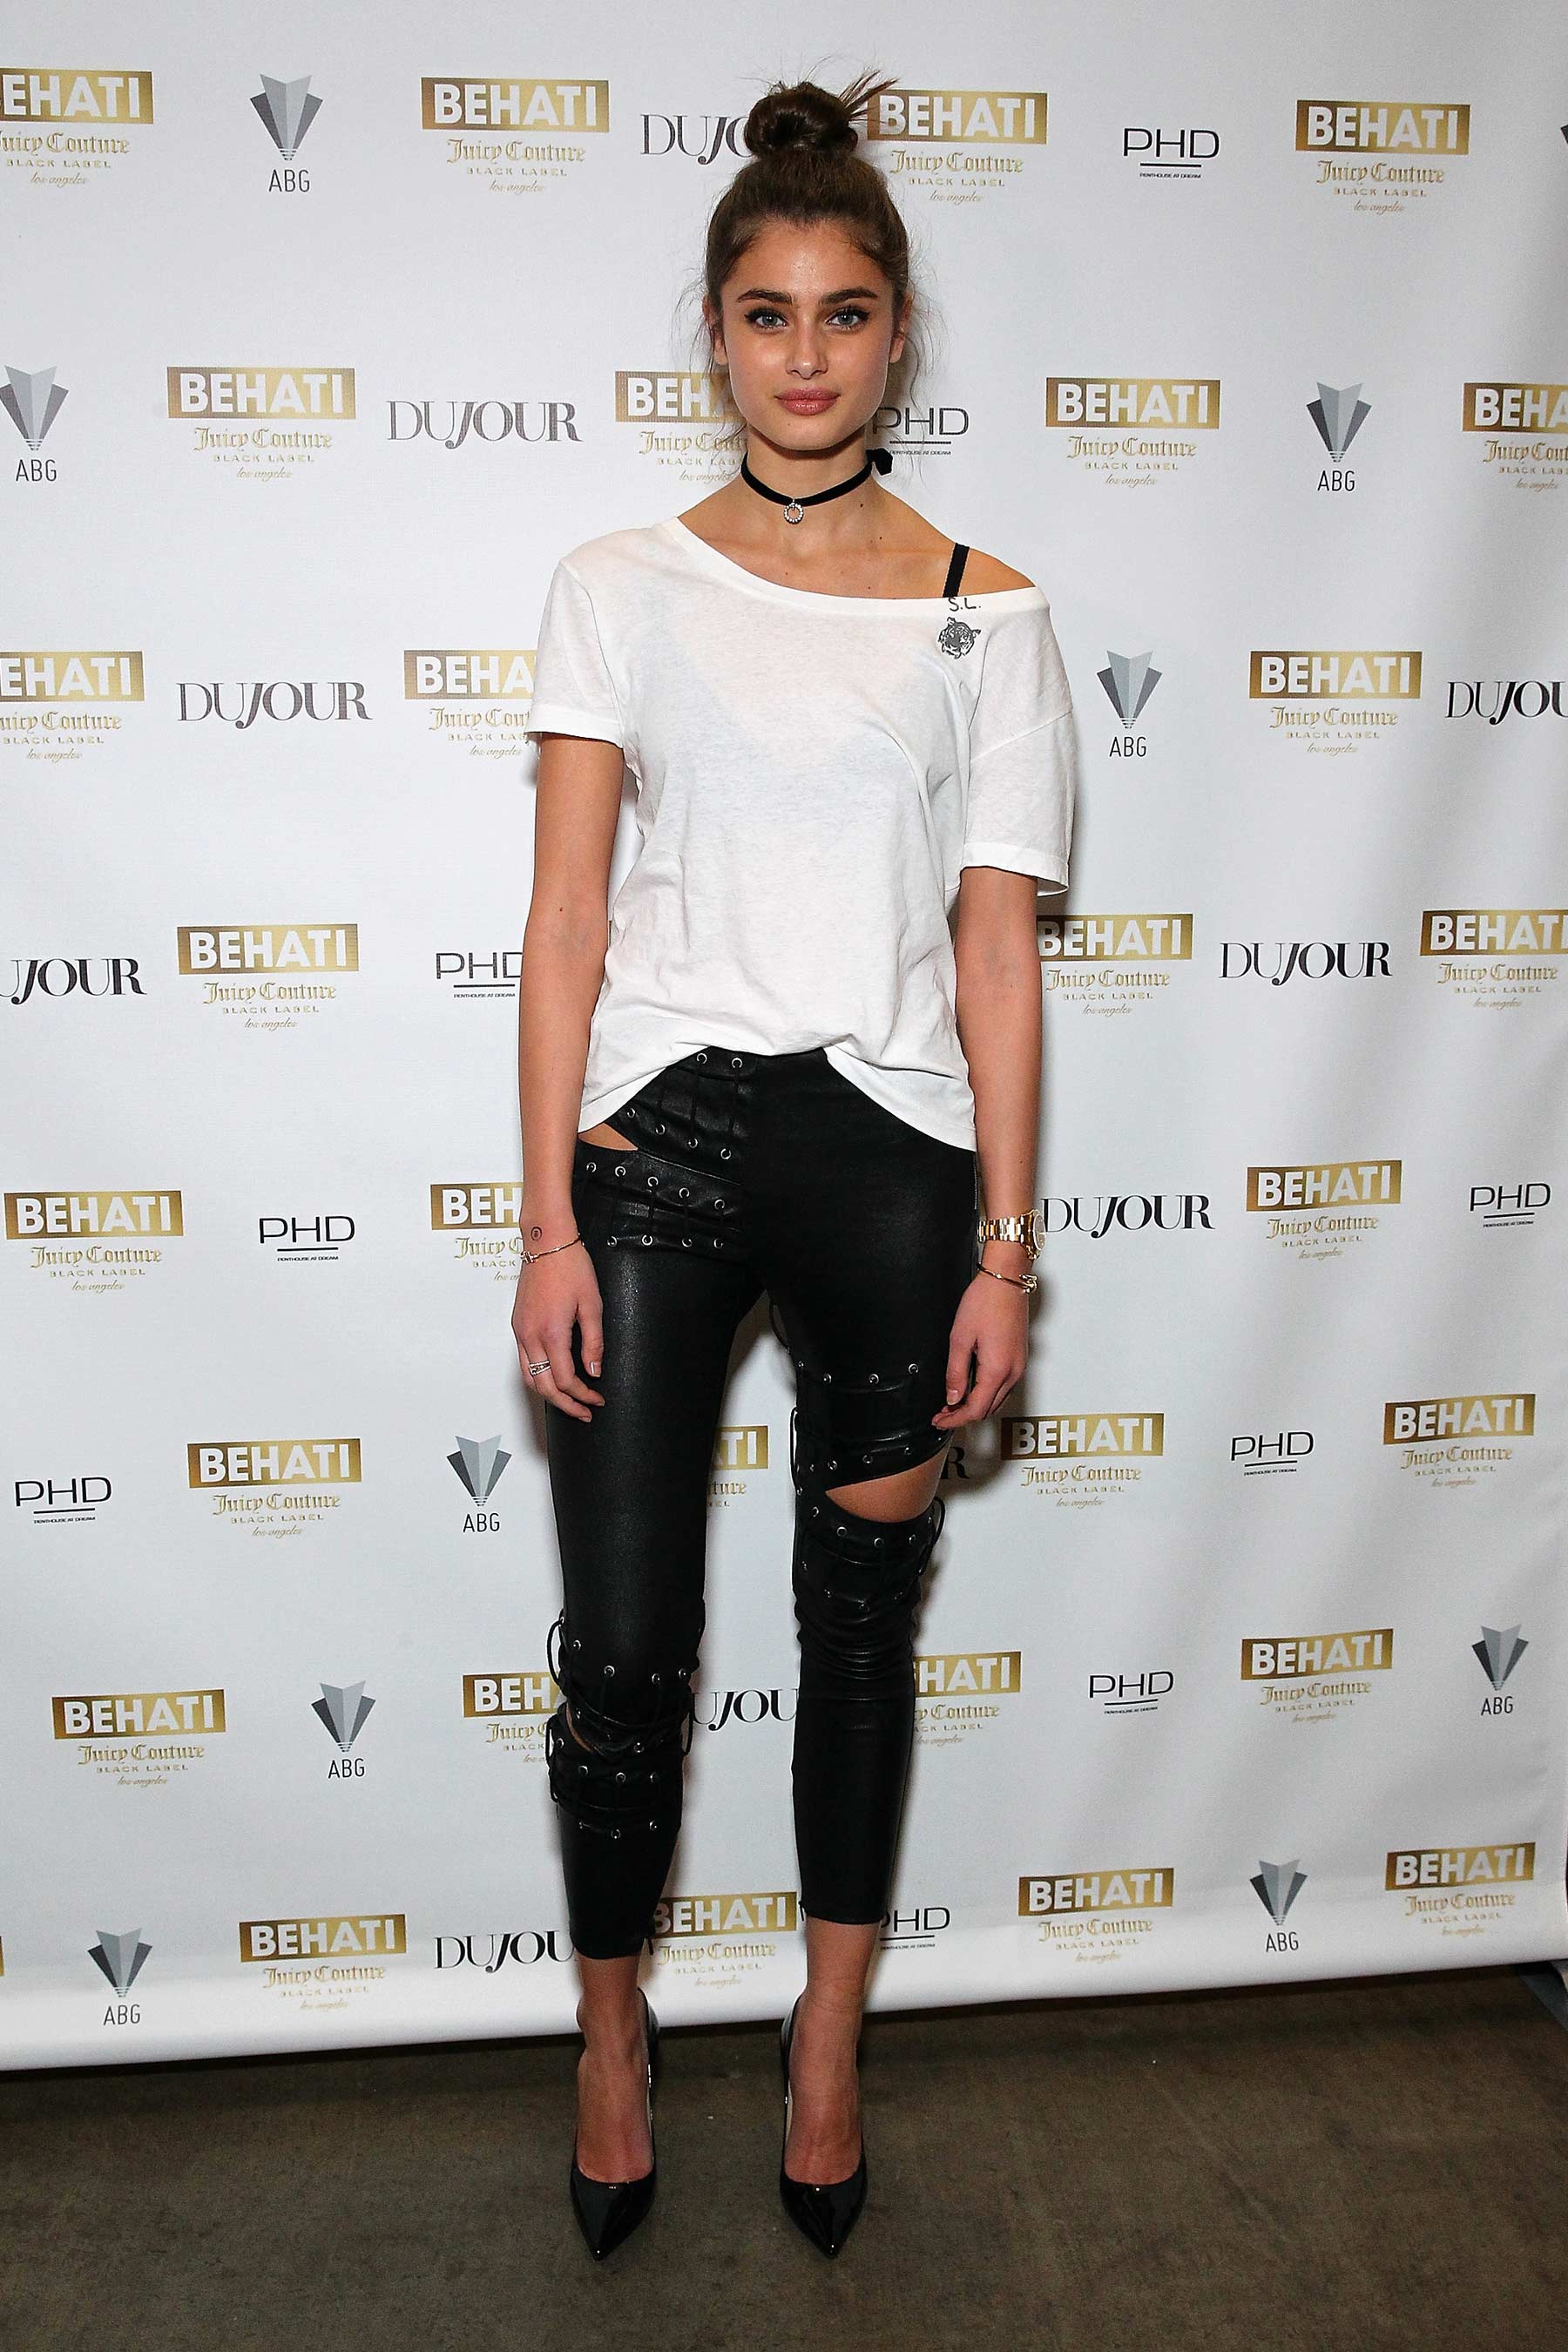 Taylor Hill attends the launch of Behati X Juicy Couture